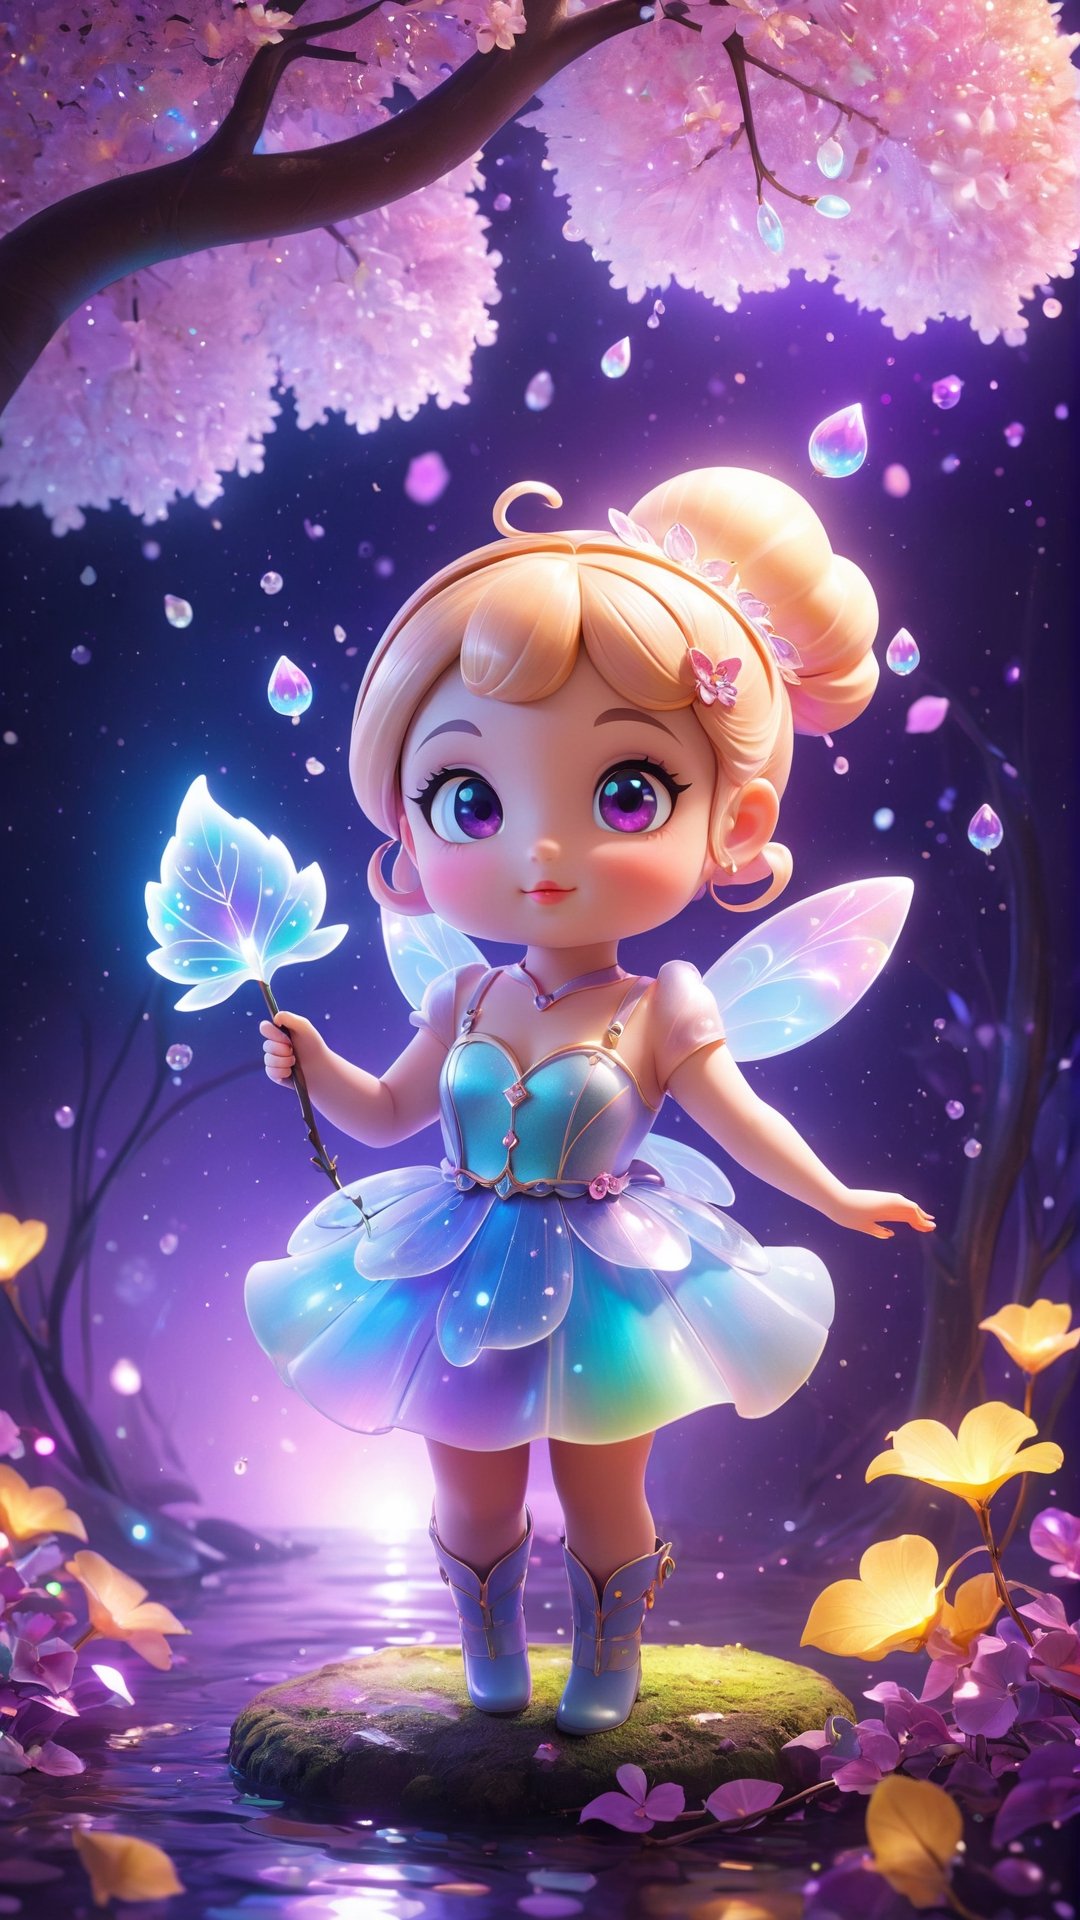 "Chibi" mascots include a cute girl cute 3d cartoon fashionable rainbow Art Nouveau fairytale poster, pin-up cuteness overload night fairytale fantasy pastel Neon Light (lighting/lasers/LEDs/Light Projection/fairy lights) cinematic, 32k, cgsociety, digital art, macrorealism, surreal, storybook illustration, expressive glowing eyes a close up luminous vivid dreamy romantic girl portrait, steampunk, unmaterial, ethereal, dreamlike holding a tree lilac branch, dynamic expressive pose detailed luminous scales, detailed skin texture, transparent body, shadow play, sparks, glittering leaves glowing contoured Burton Craola, Ryden, Ceccoli, octane render dynamic intricated pose, sleek, modern., fairytale, fantasy, by Andy Kehoe, artistic water drops on petals, detailed petals texture, dynamic pose, tender, soft pastel colors, octane render, beautiful, tiny detailed